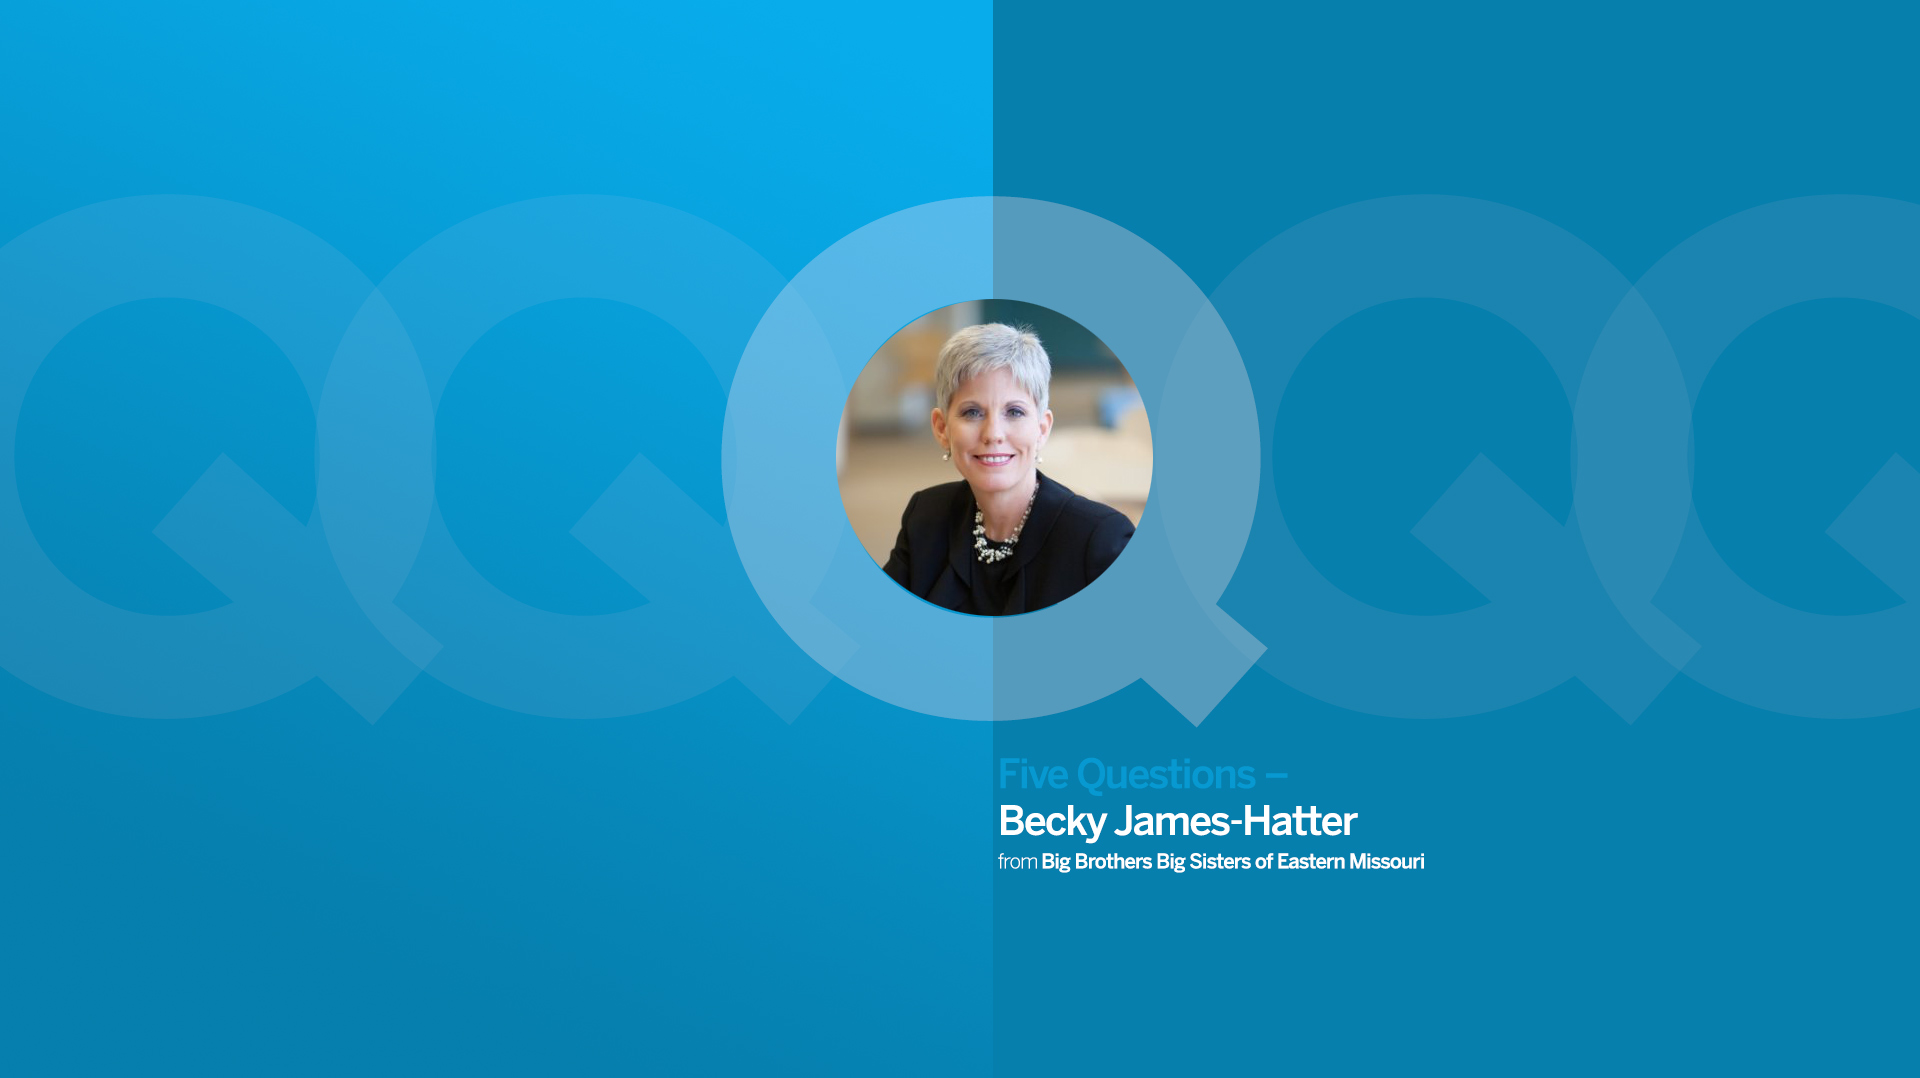 Five Questions with Becky James-Hatter